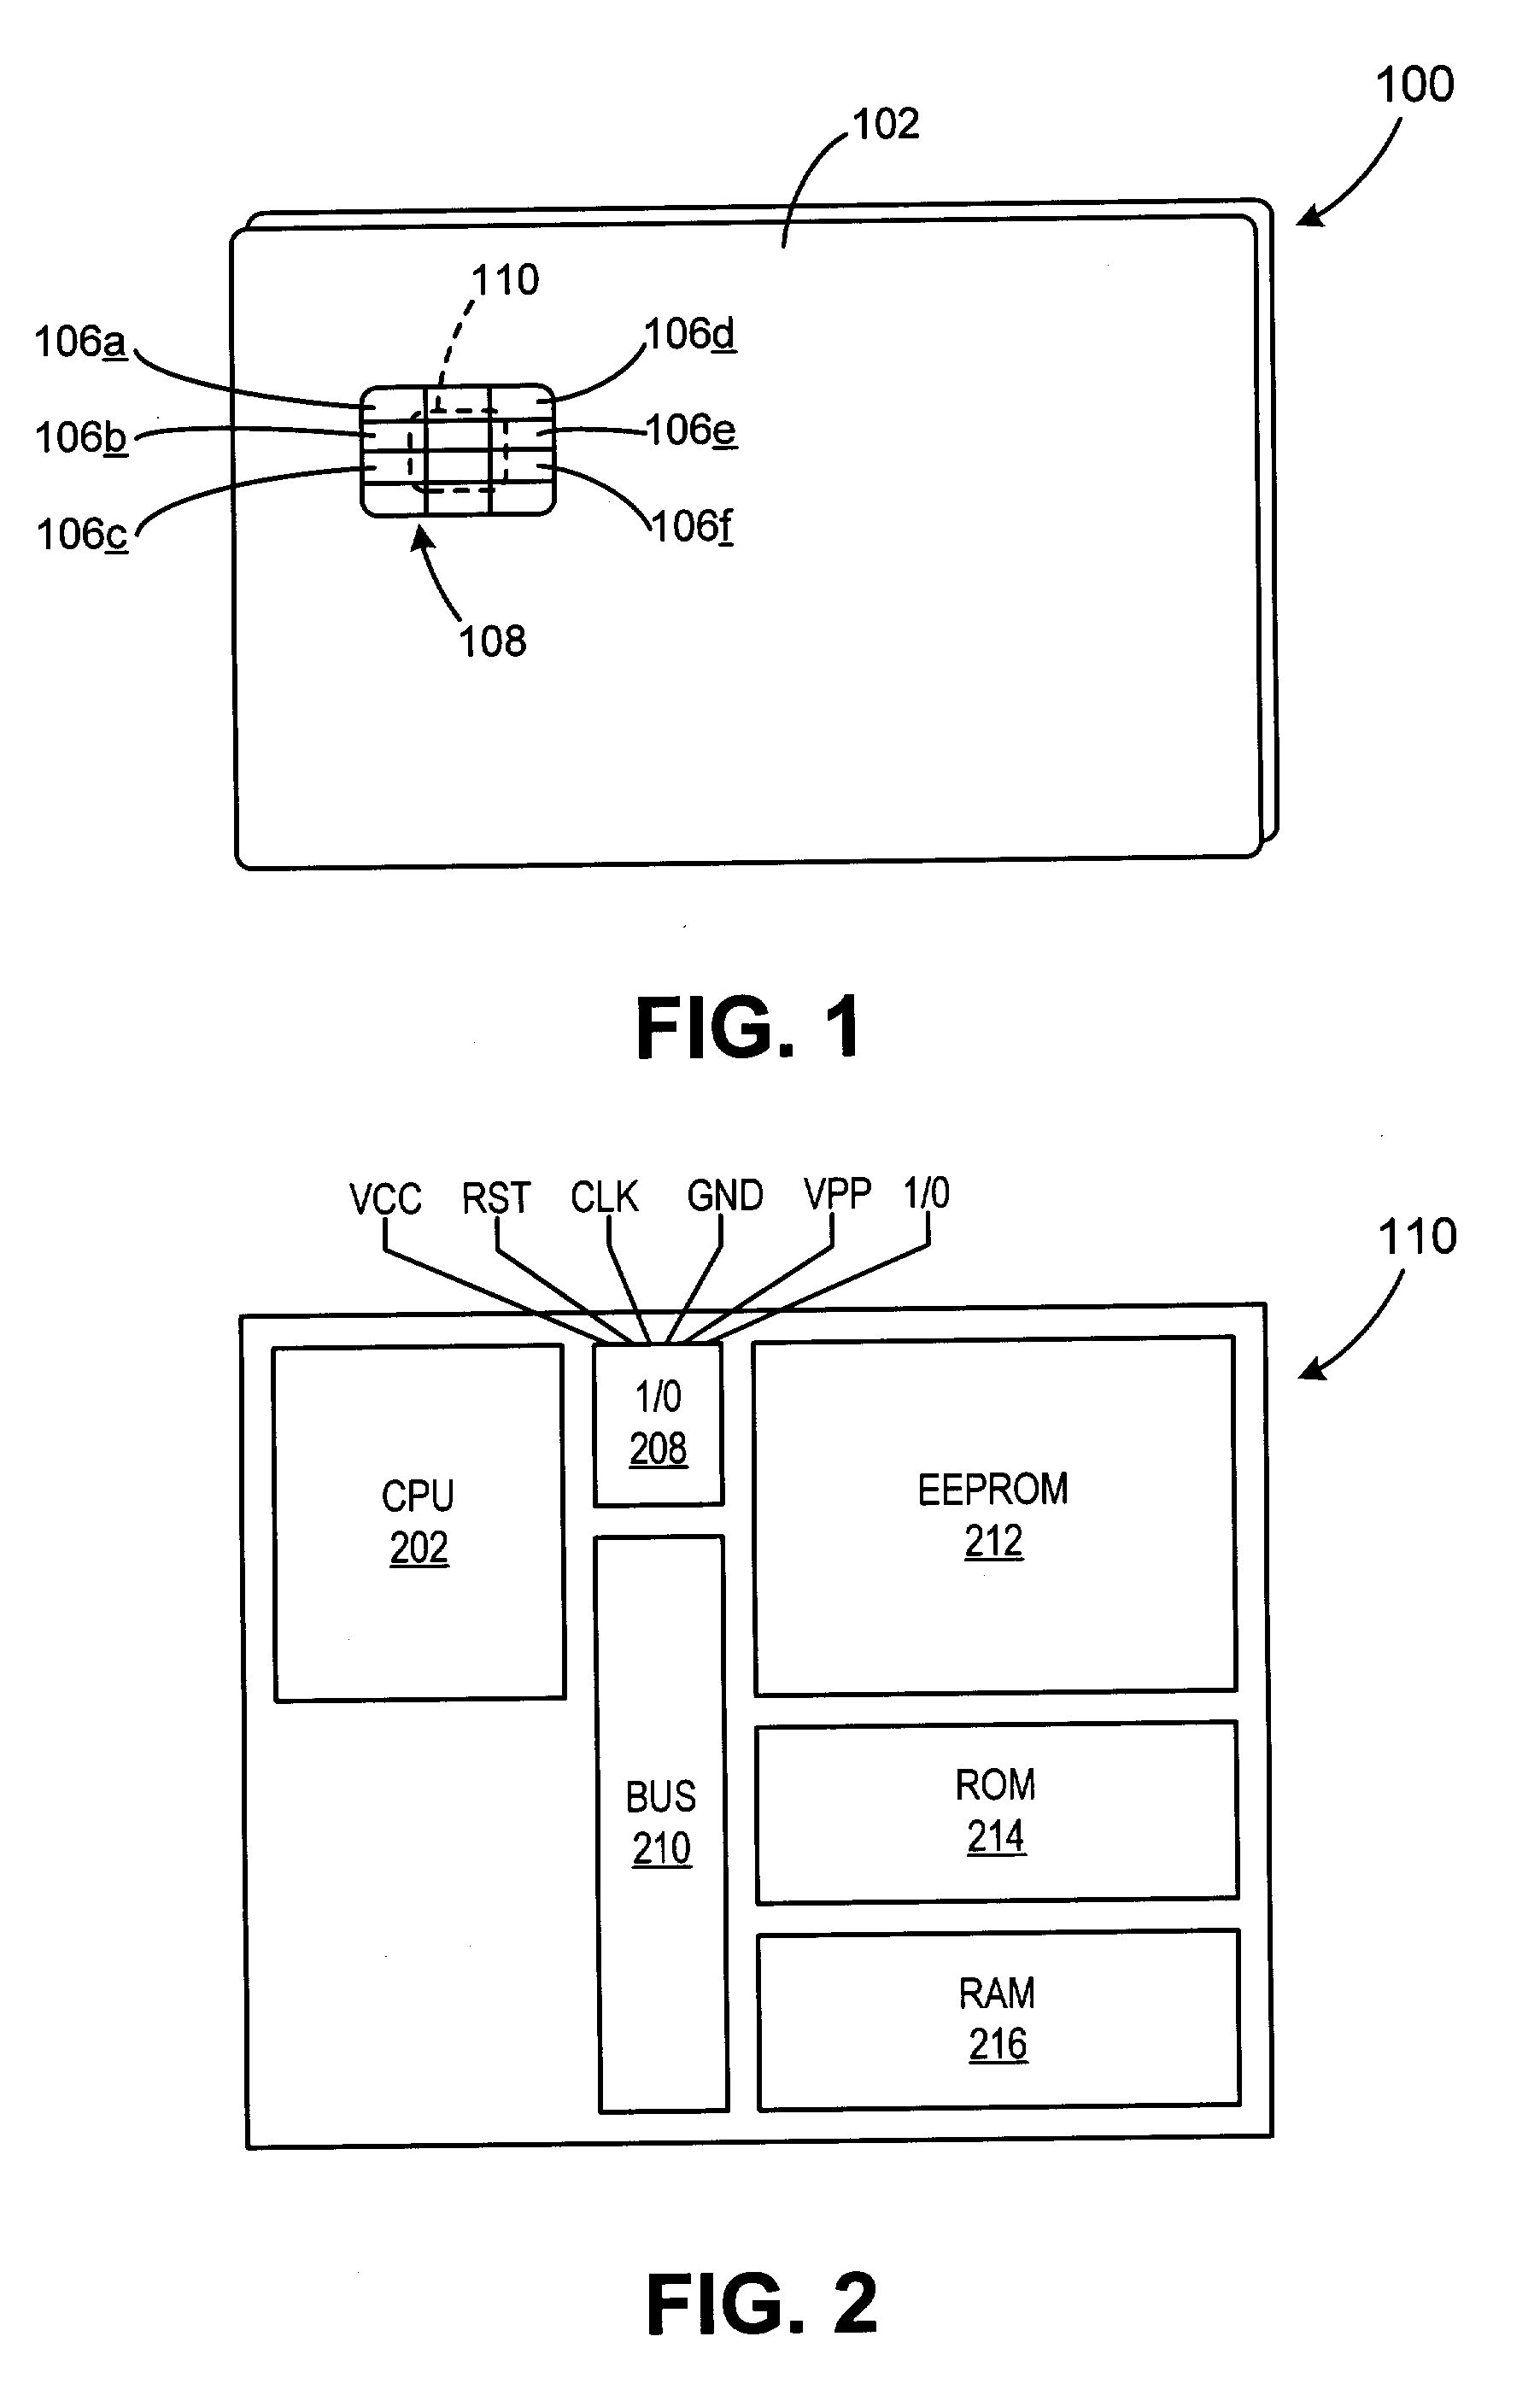 Method and system for signature recognition biometrics on a smartcard